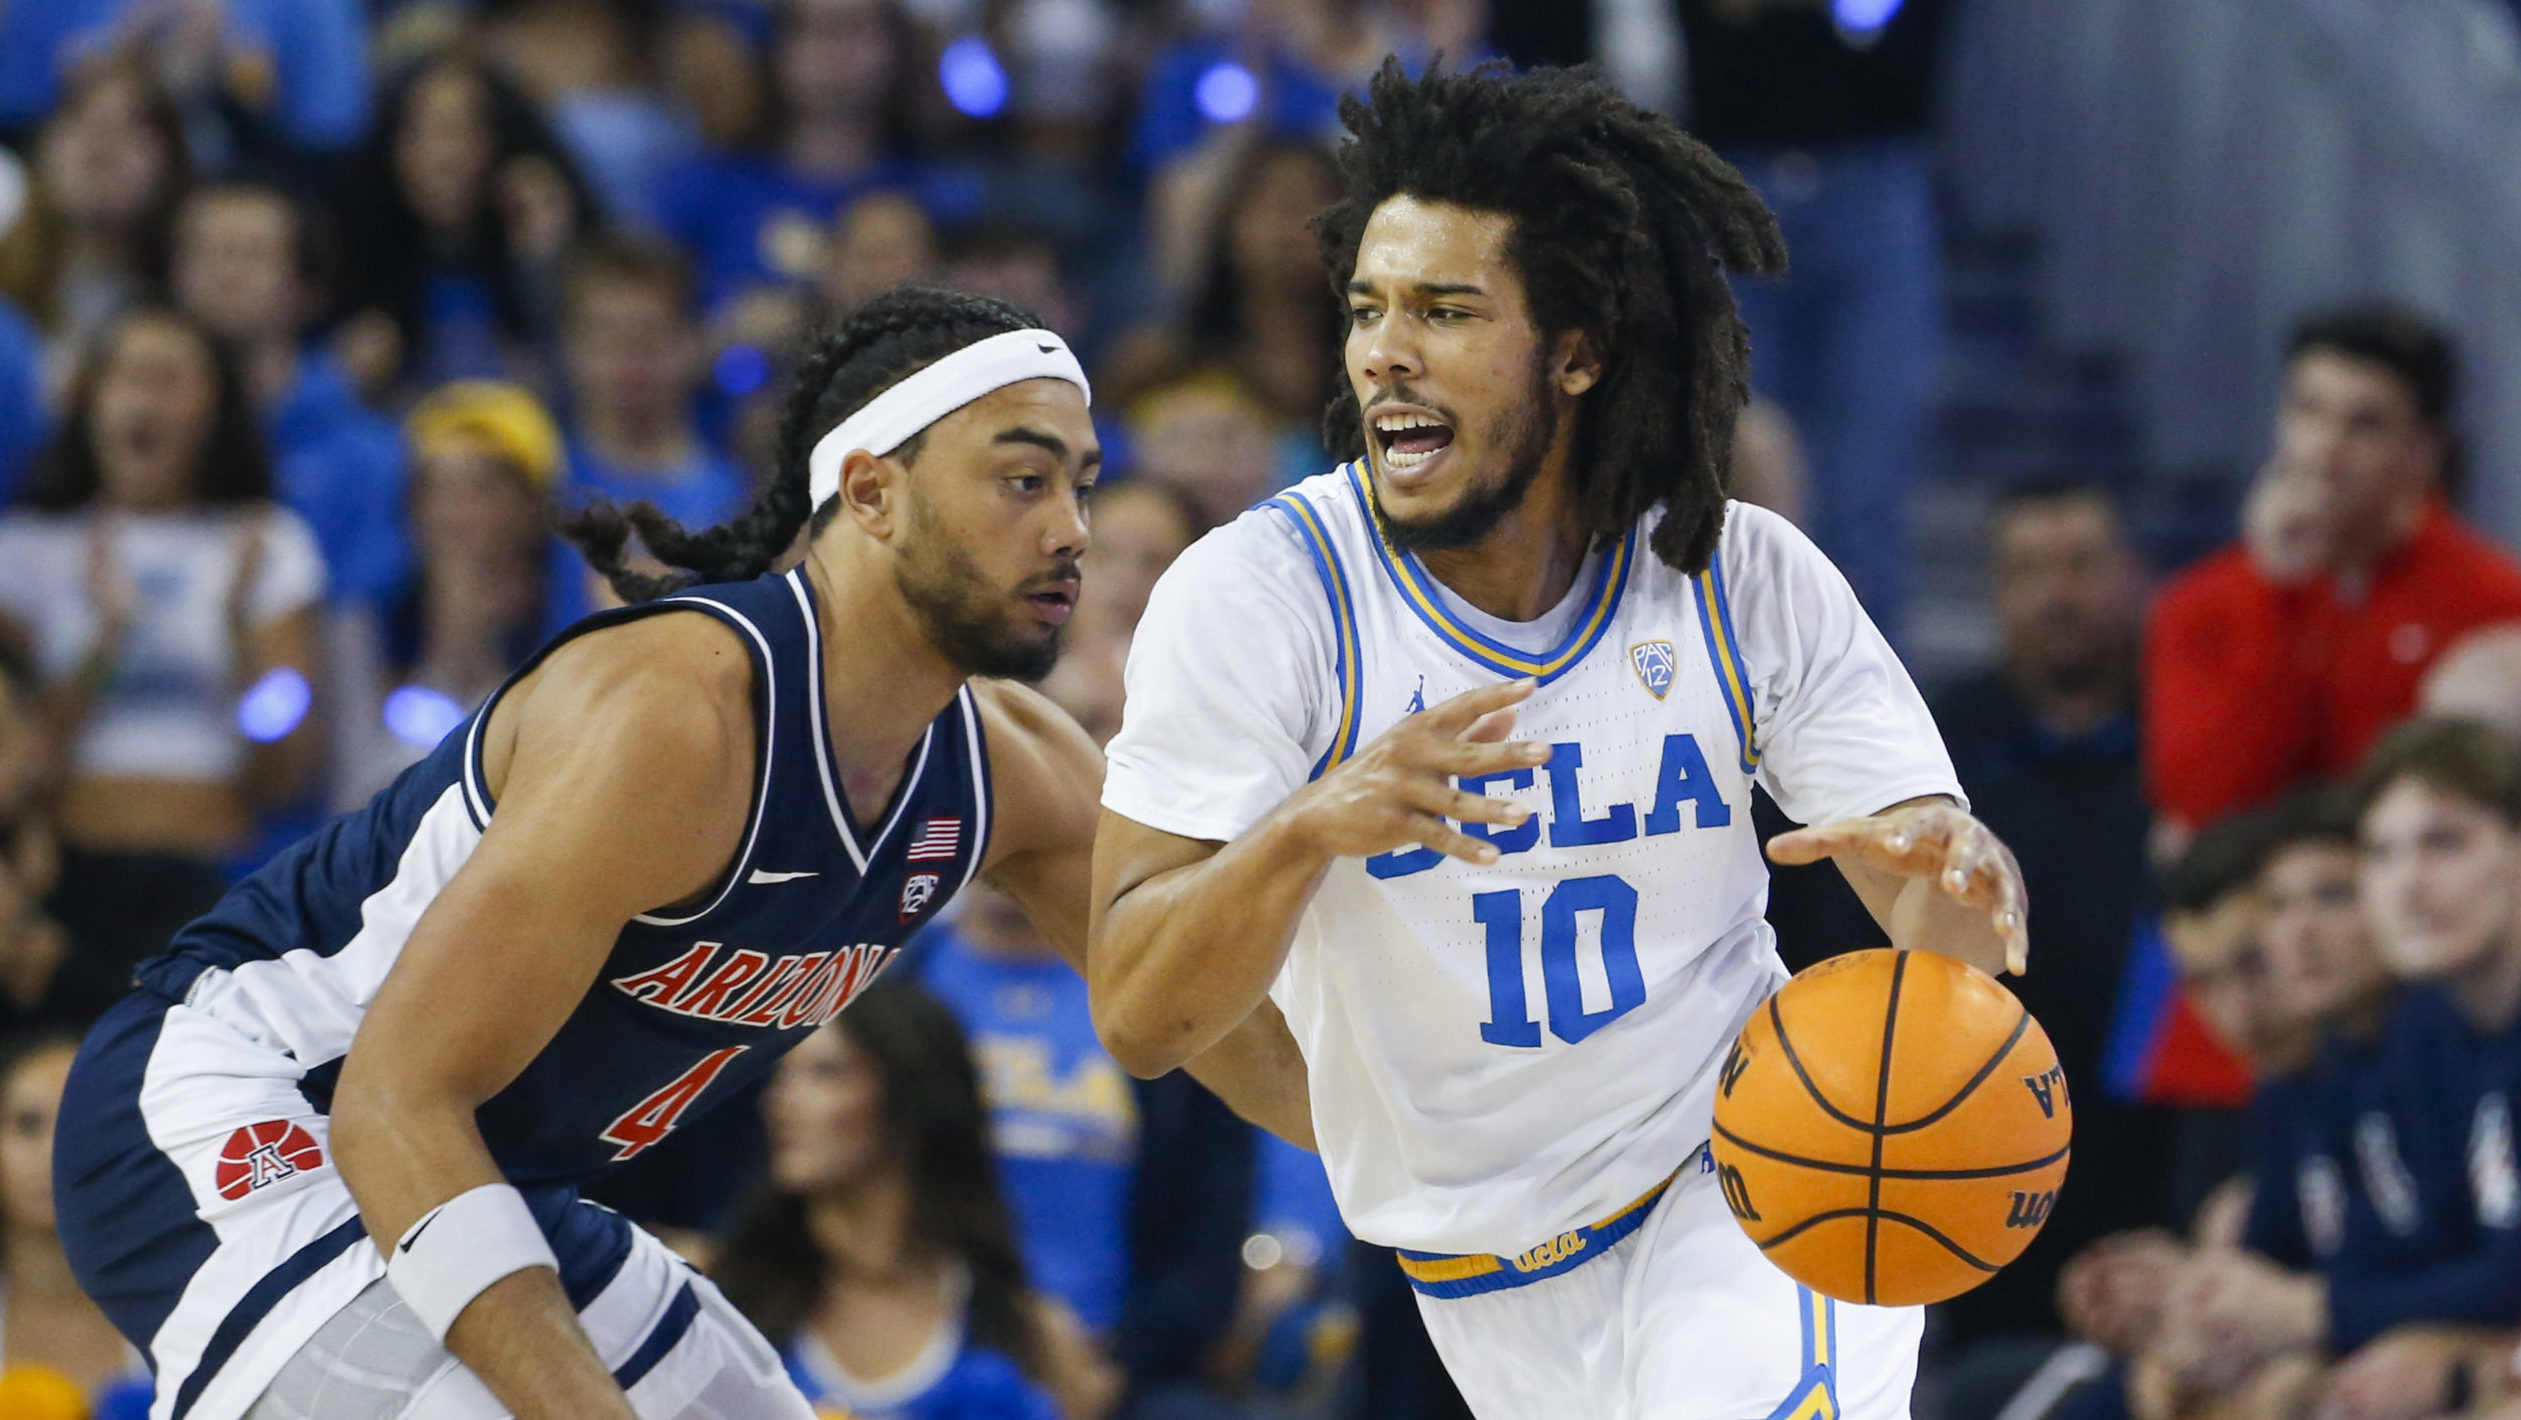 UCLA guard Tyger Campbell, right, drives past Arizona guard Kylan Boswell during the first half of ...